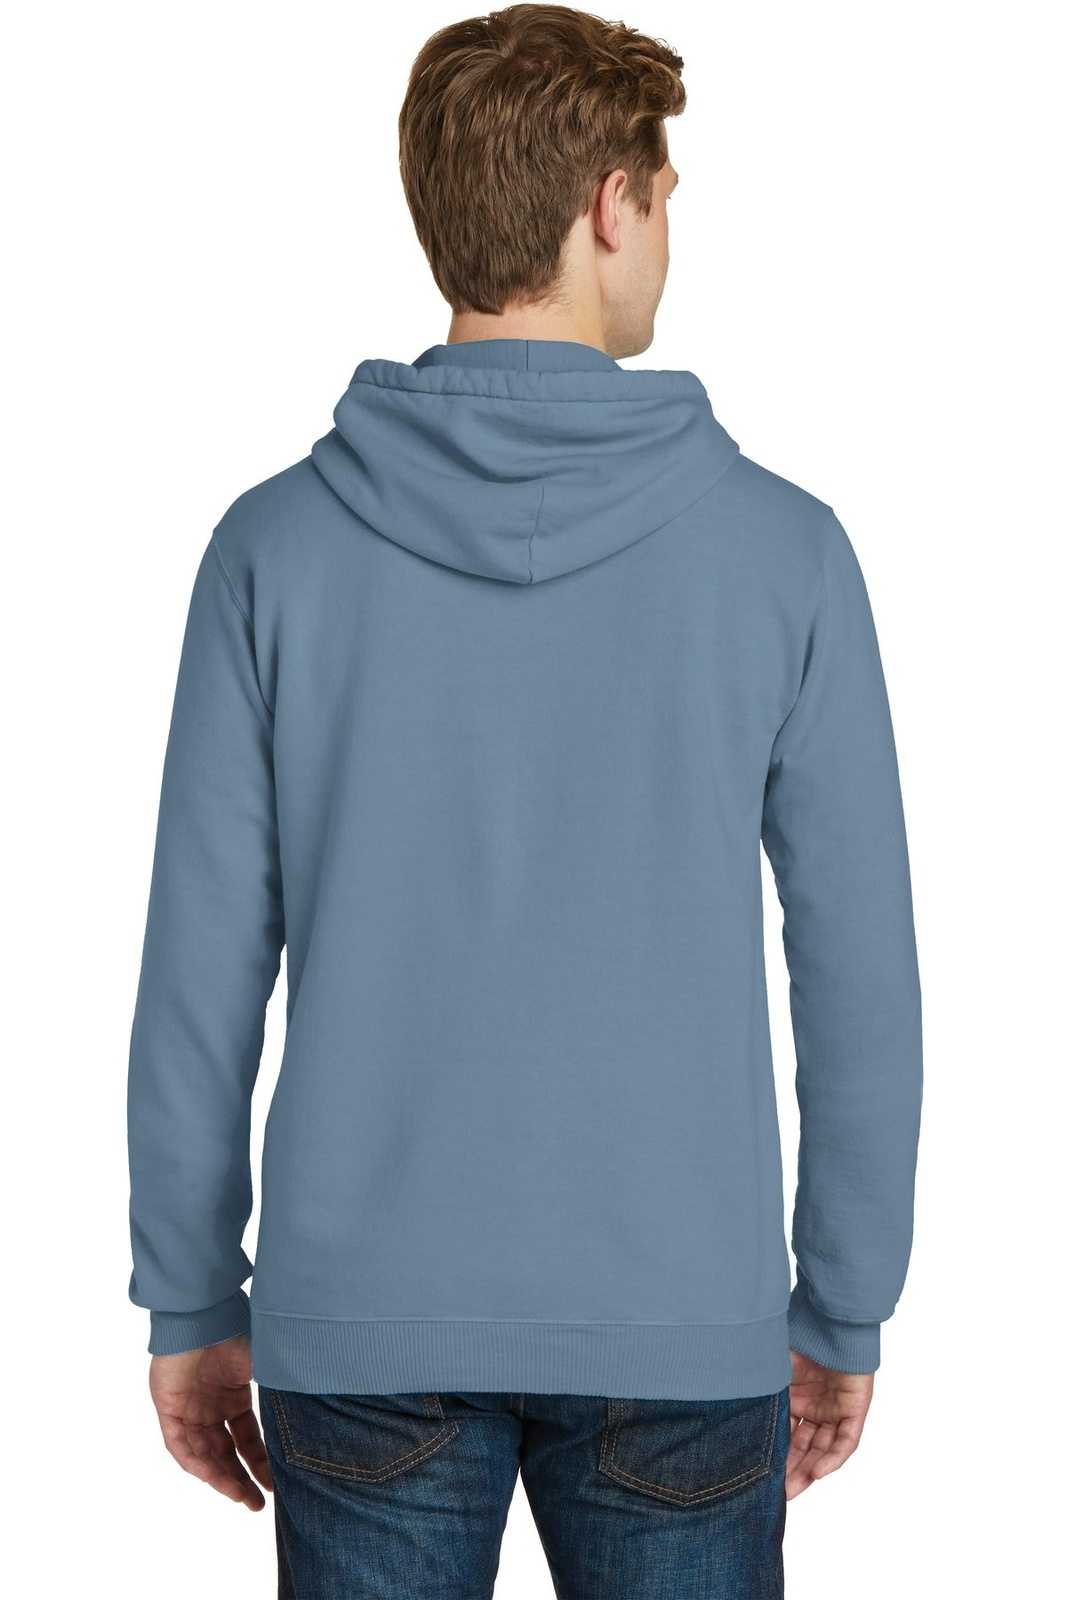 Port & Company PC098H Beach Wash Garment-Dyed Pullover Hooded Sweatshirt - Denim Blue - HIT a Double - 1